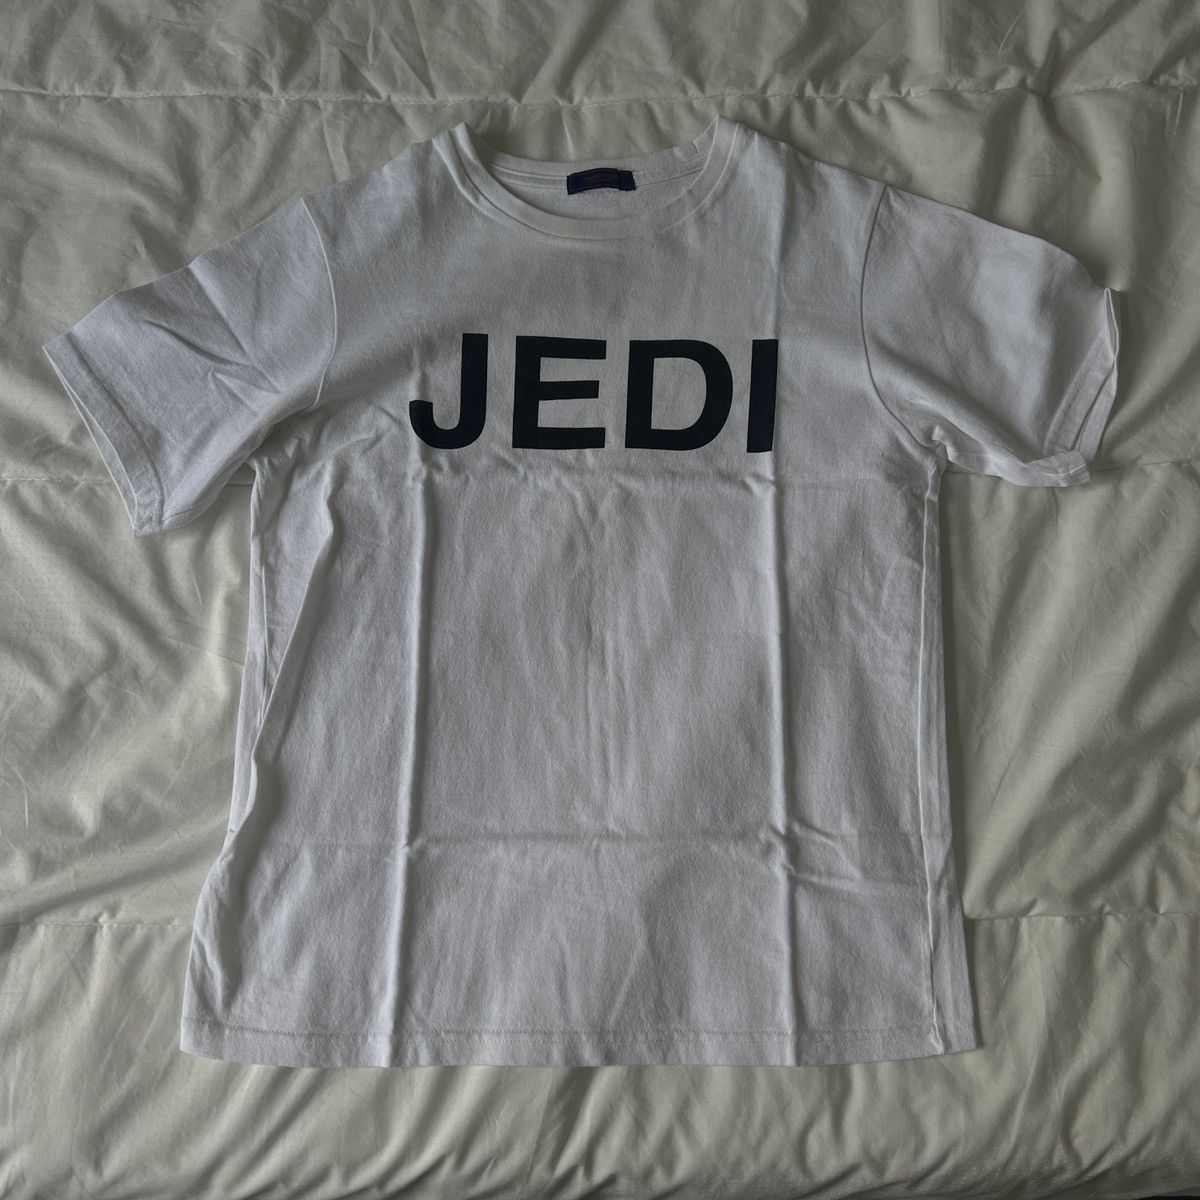 Pre-owned Undercover Jedi Tee Fits Like Xs In White